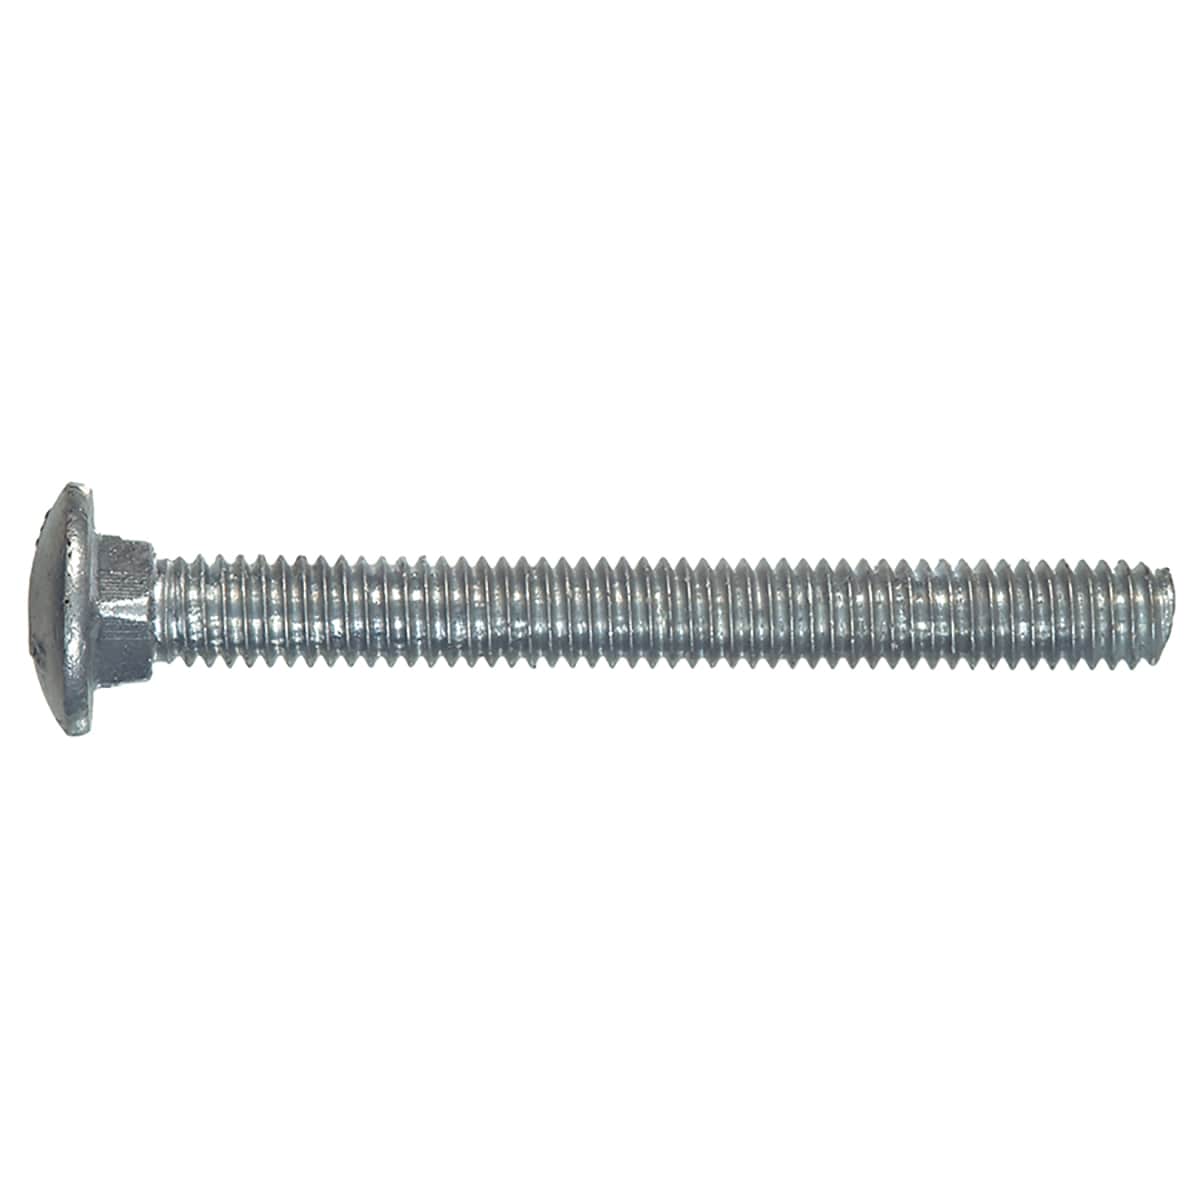 5/16-18 x 2" Carriage Bolts and Nuts Hot Dip Galvanized Quantity 250 